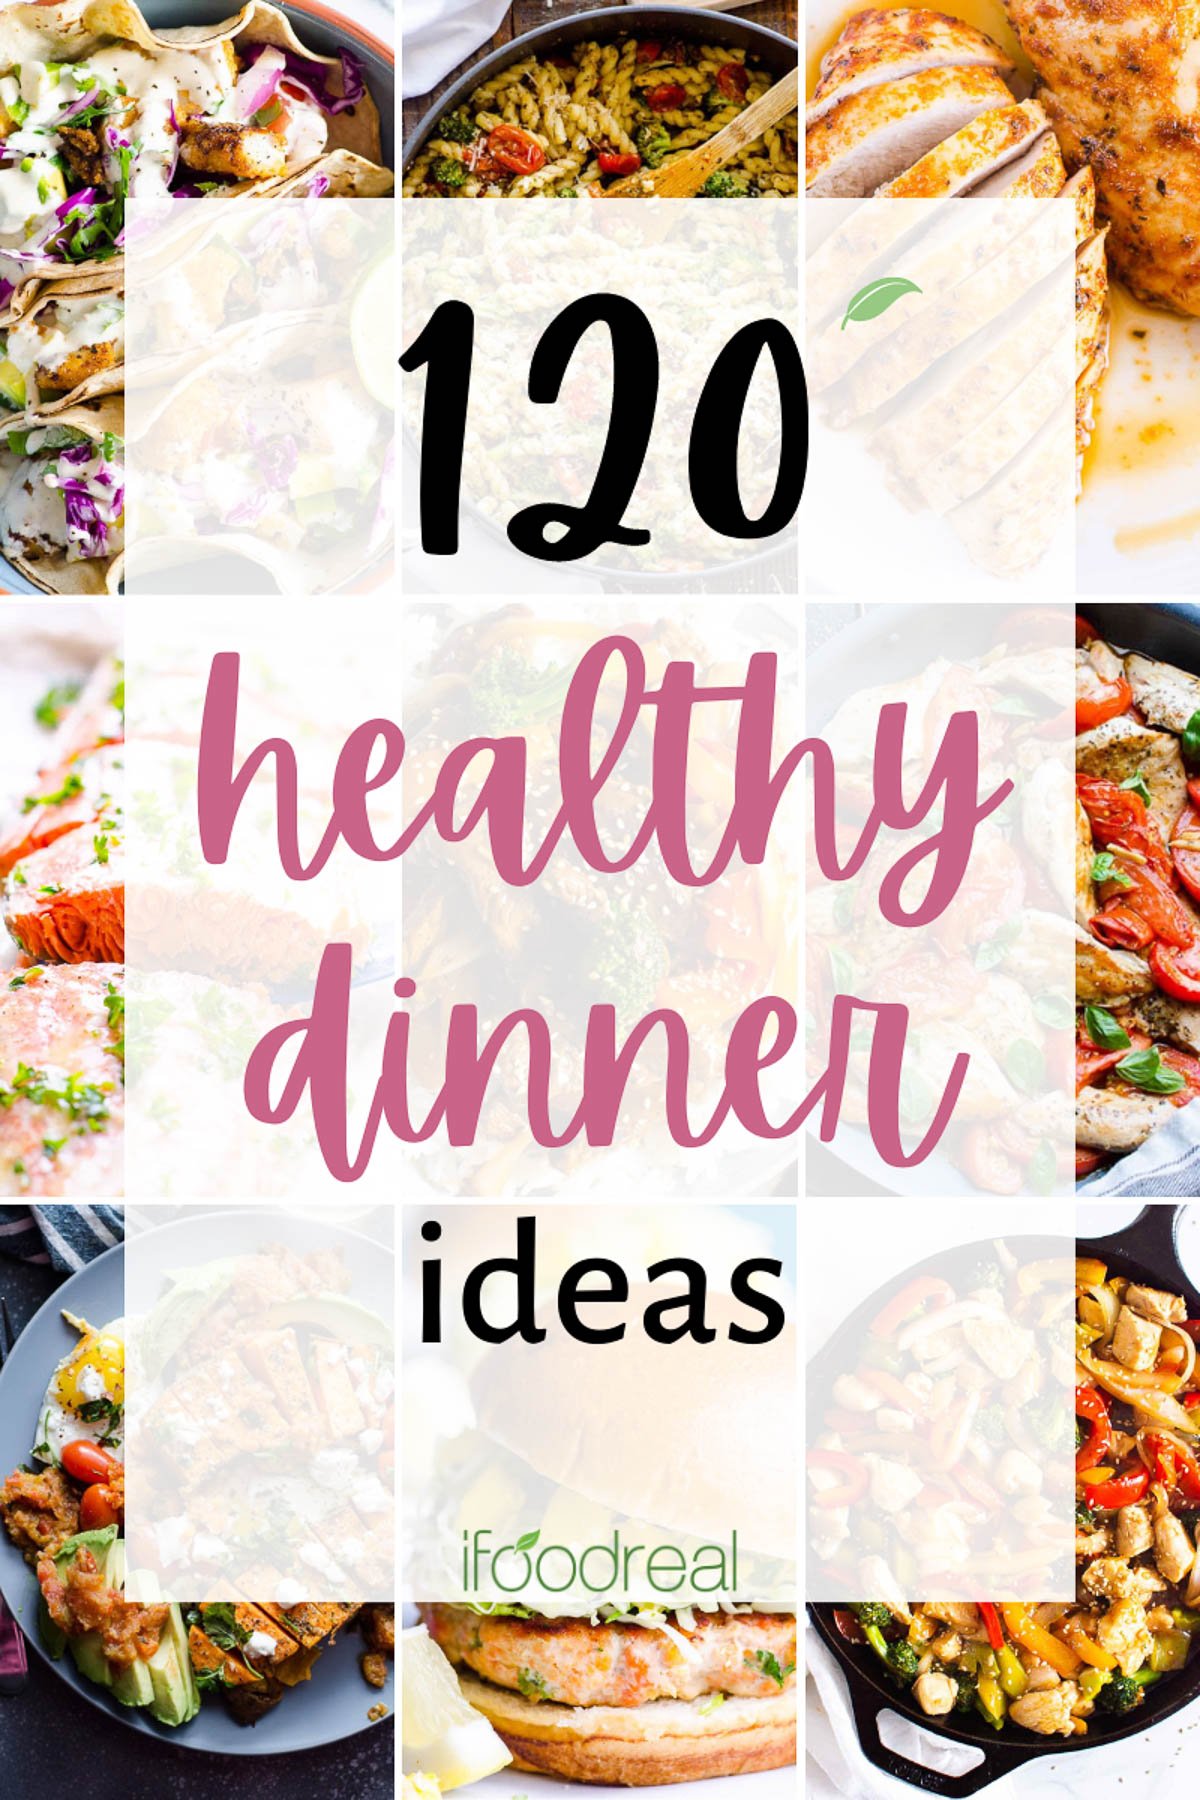 Collage of 120 quick easy healthy dinner ideas.